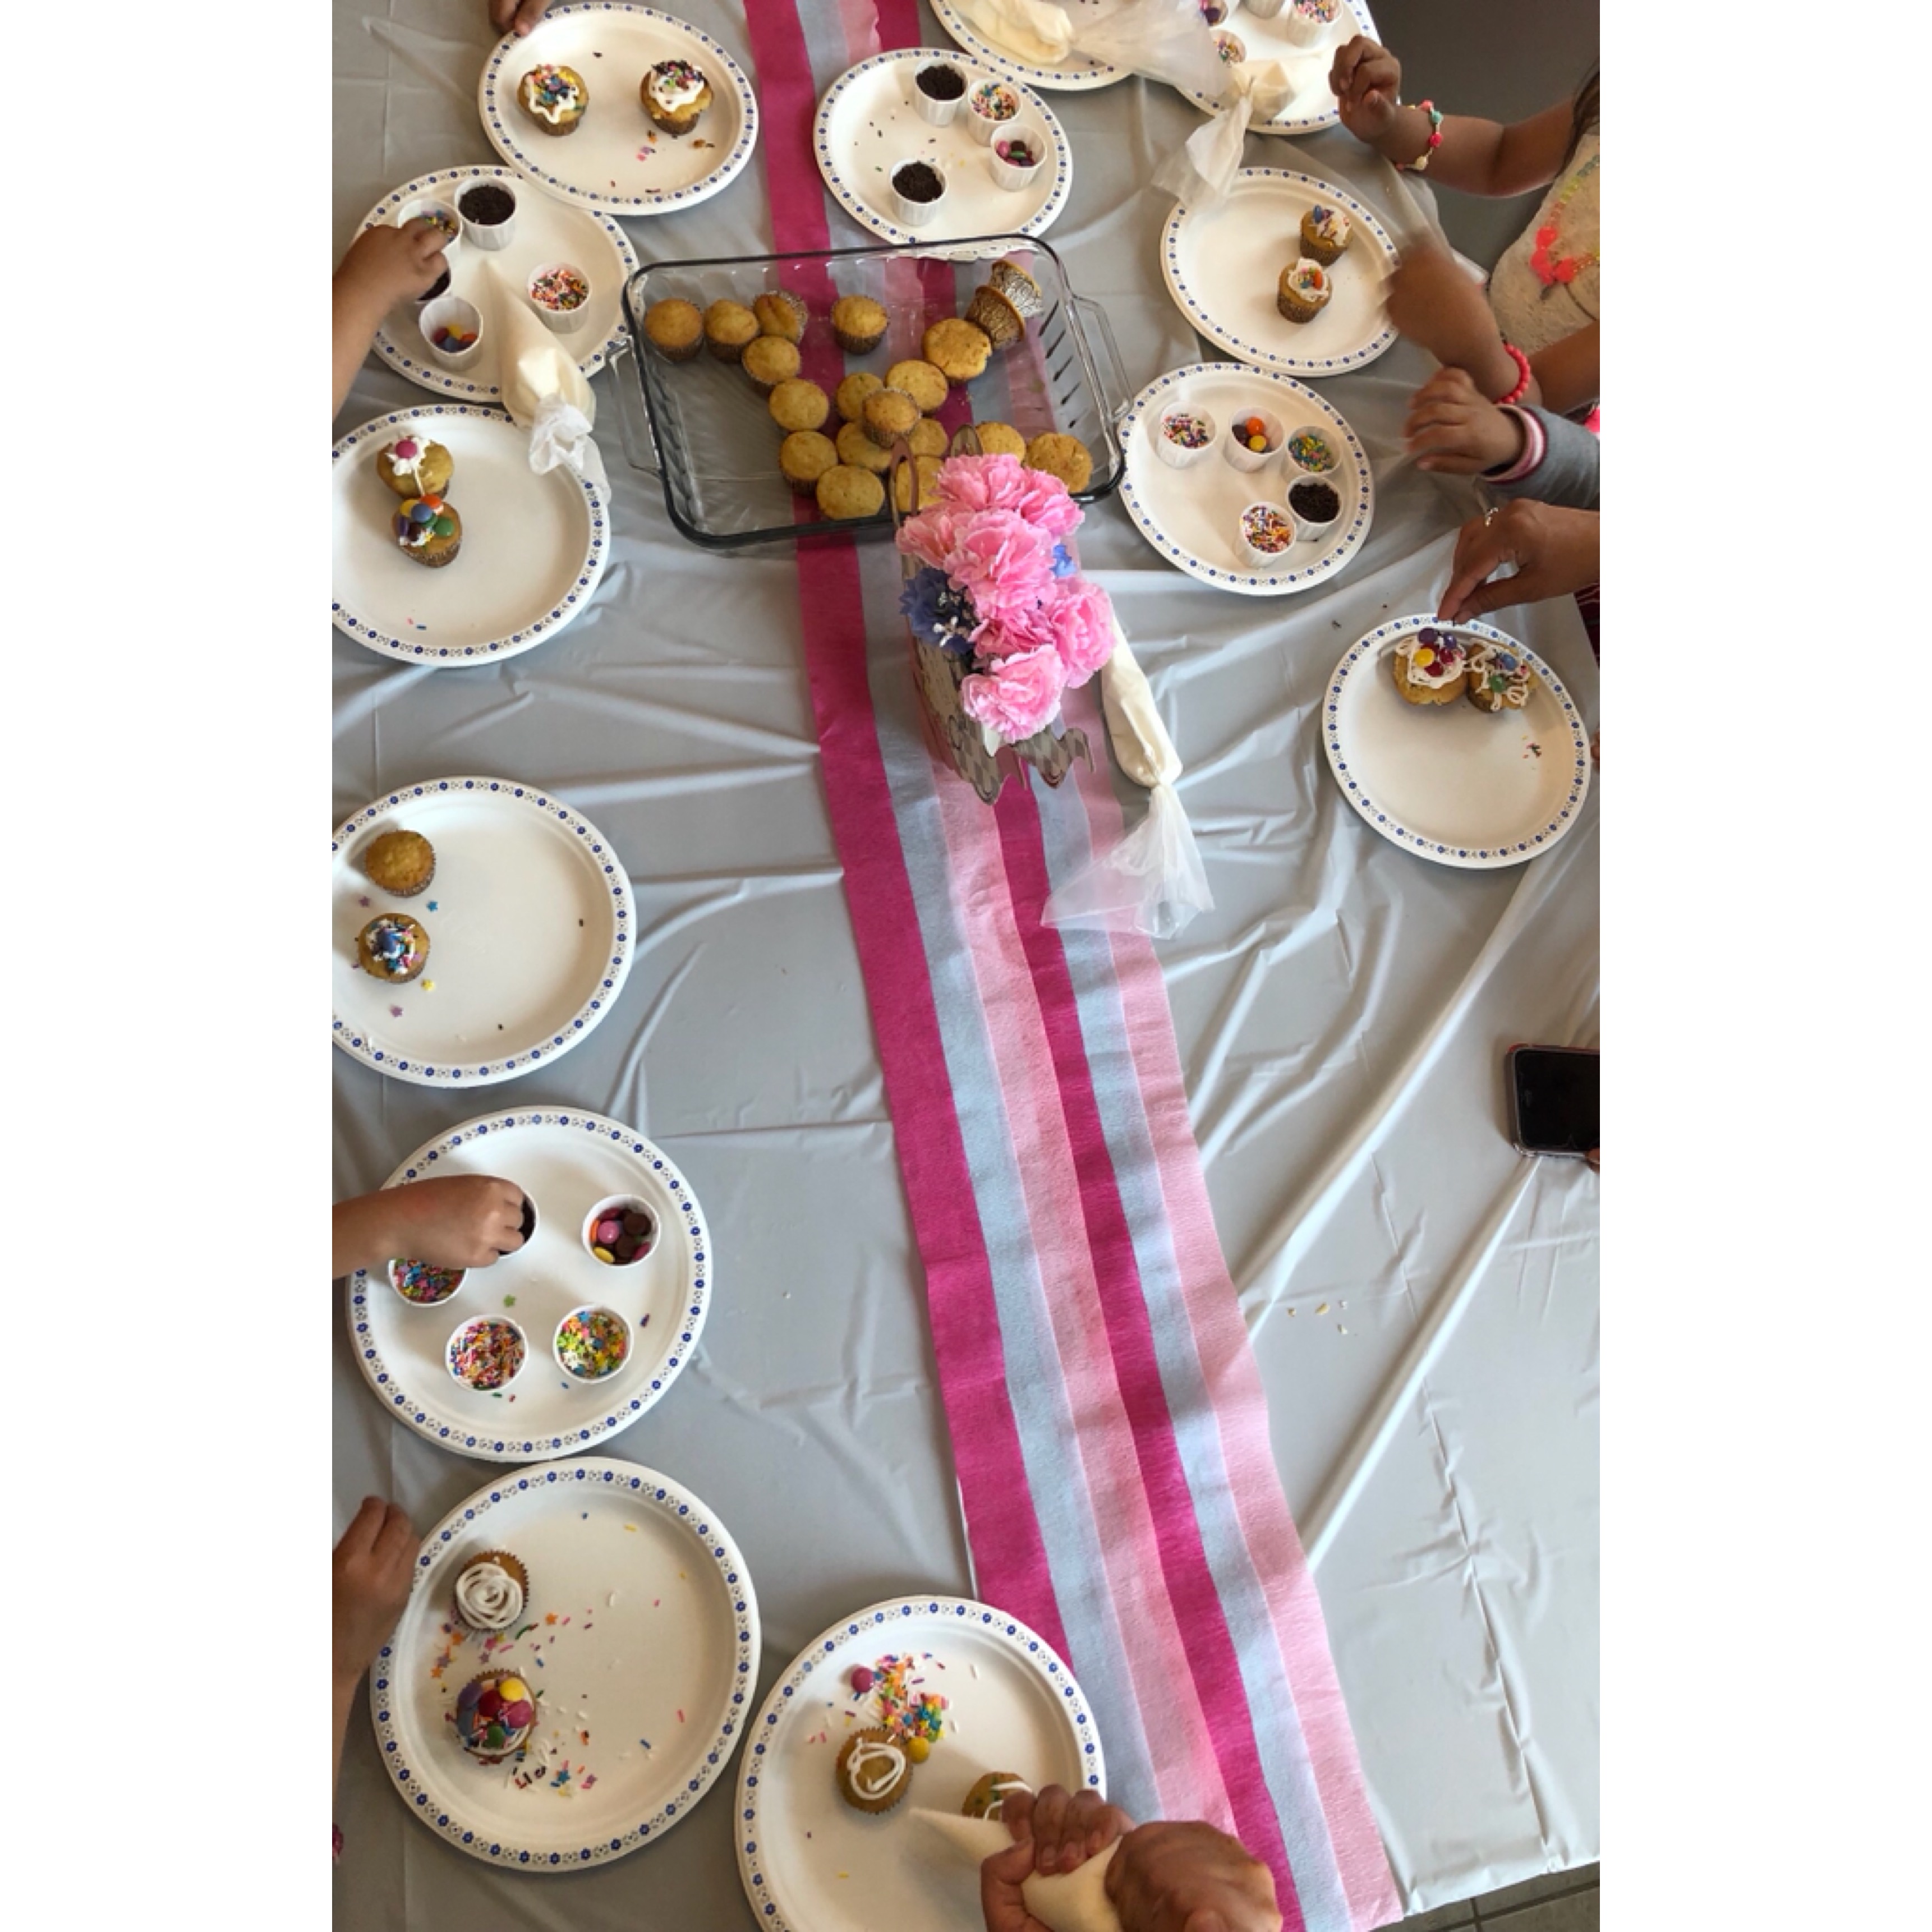 Adorable ideas for the perfect tea party birthday!